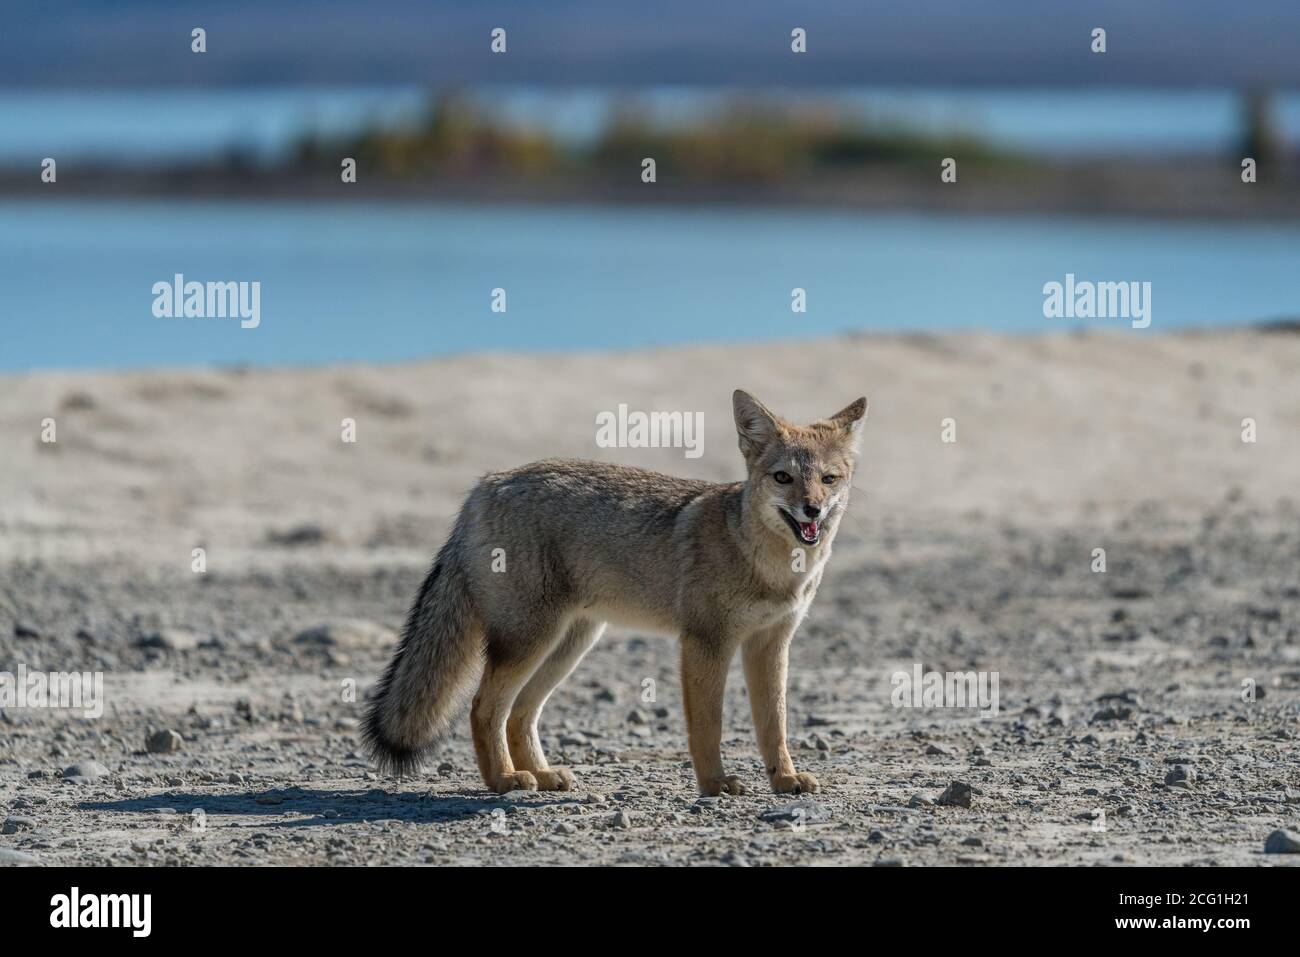 The South American Gray Fox, Lycalopex griseus, is also known as the chilla, the gray zorro or the Patagonia Fox. They are commonly found throughout P Stock Photo